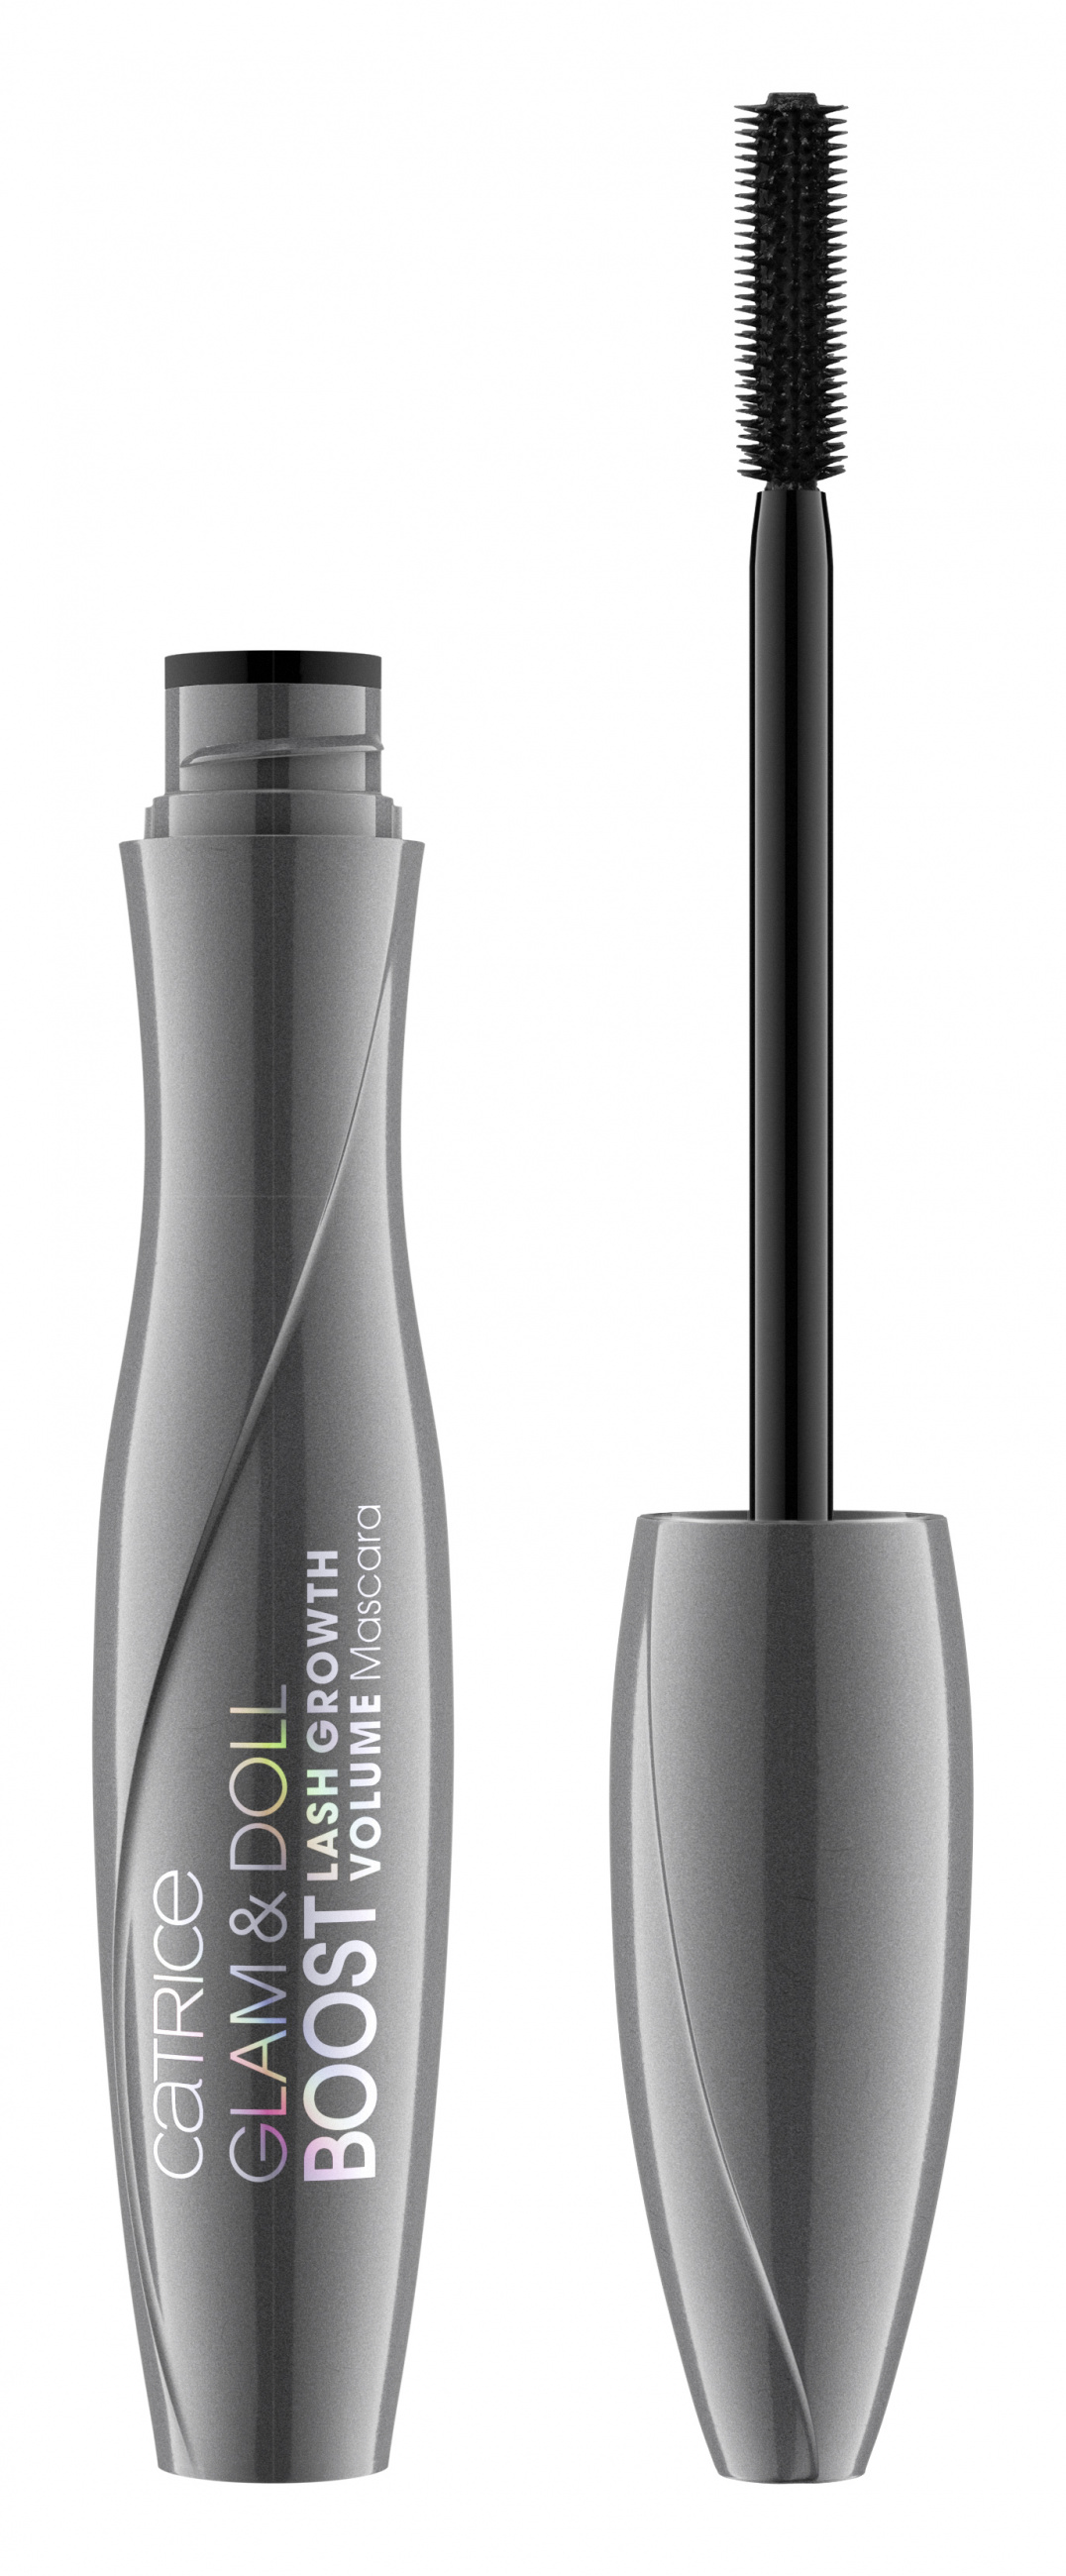 Catrice Glam & Doll Boost Lash Growth Volume Mascara 010 Ultra Black_Image_jpg_Front View Full Open.jpeg